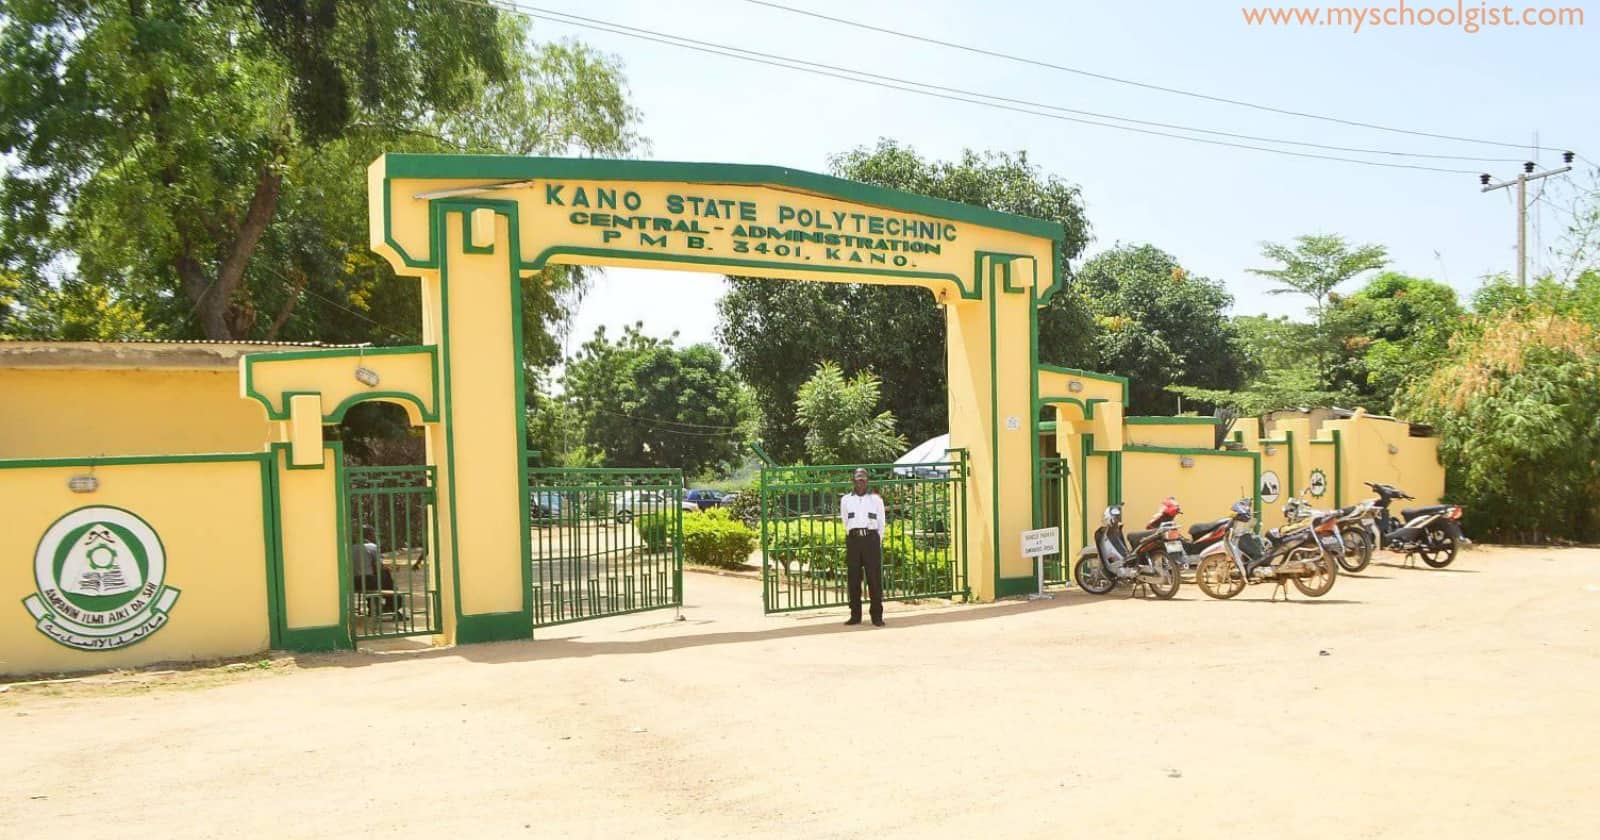 Kano State Polytechnic (KANOPOLY) Admission List